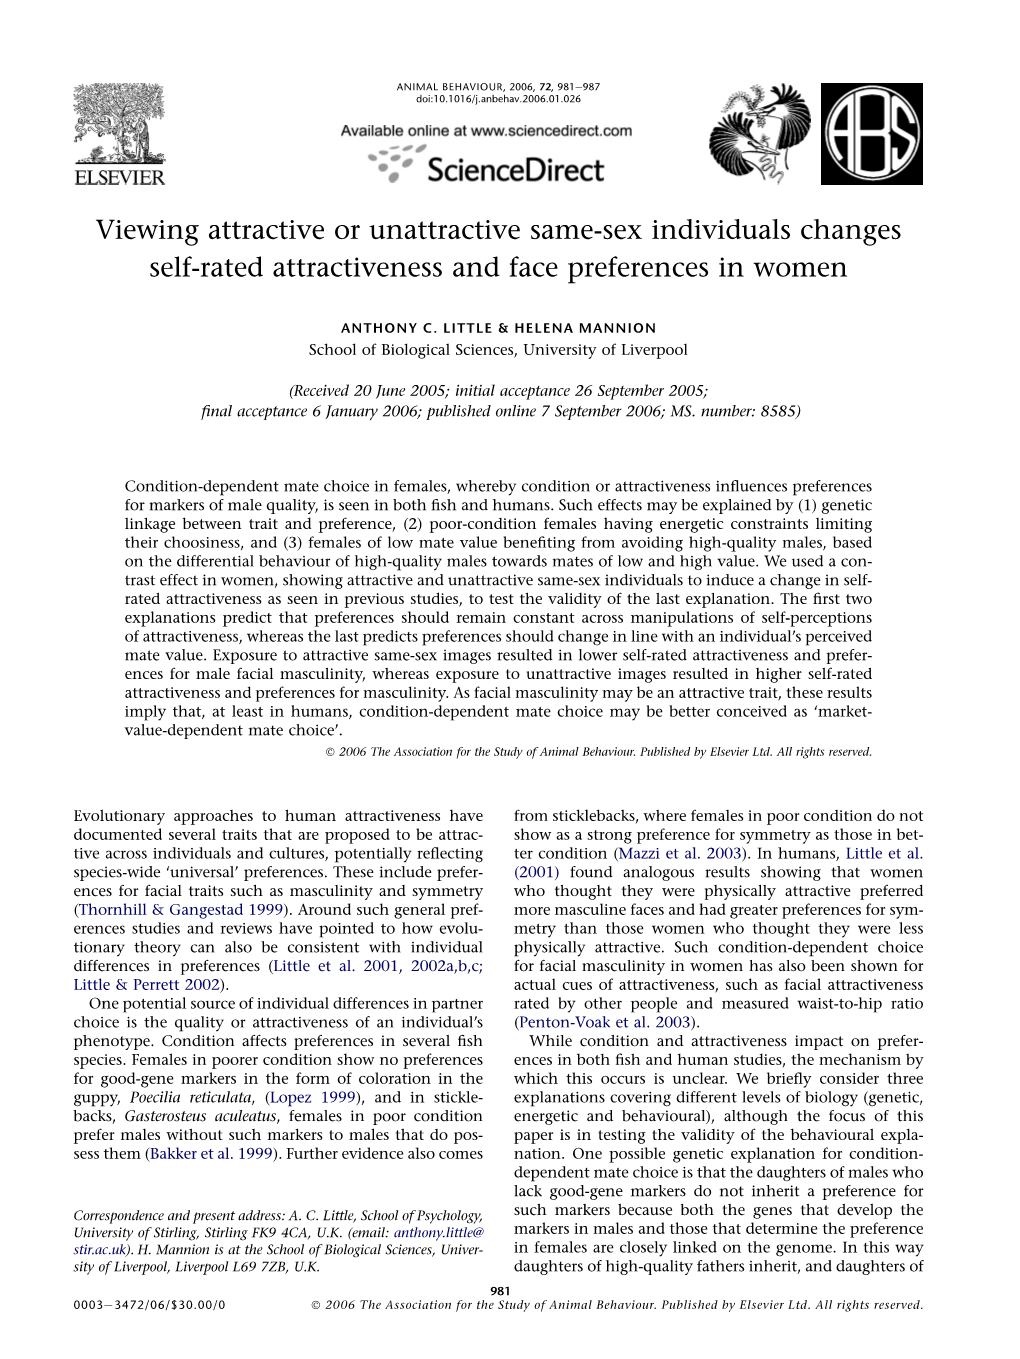 Viewing Attractive Or Unattractive Same-Sex Individuals Changes Self-Rated Attractiveness and Face Preferences in Women